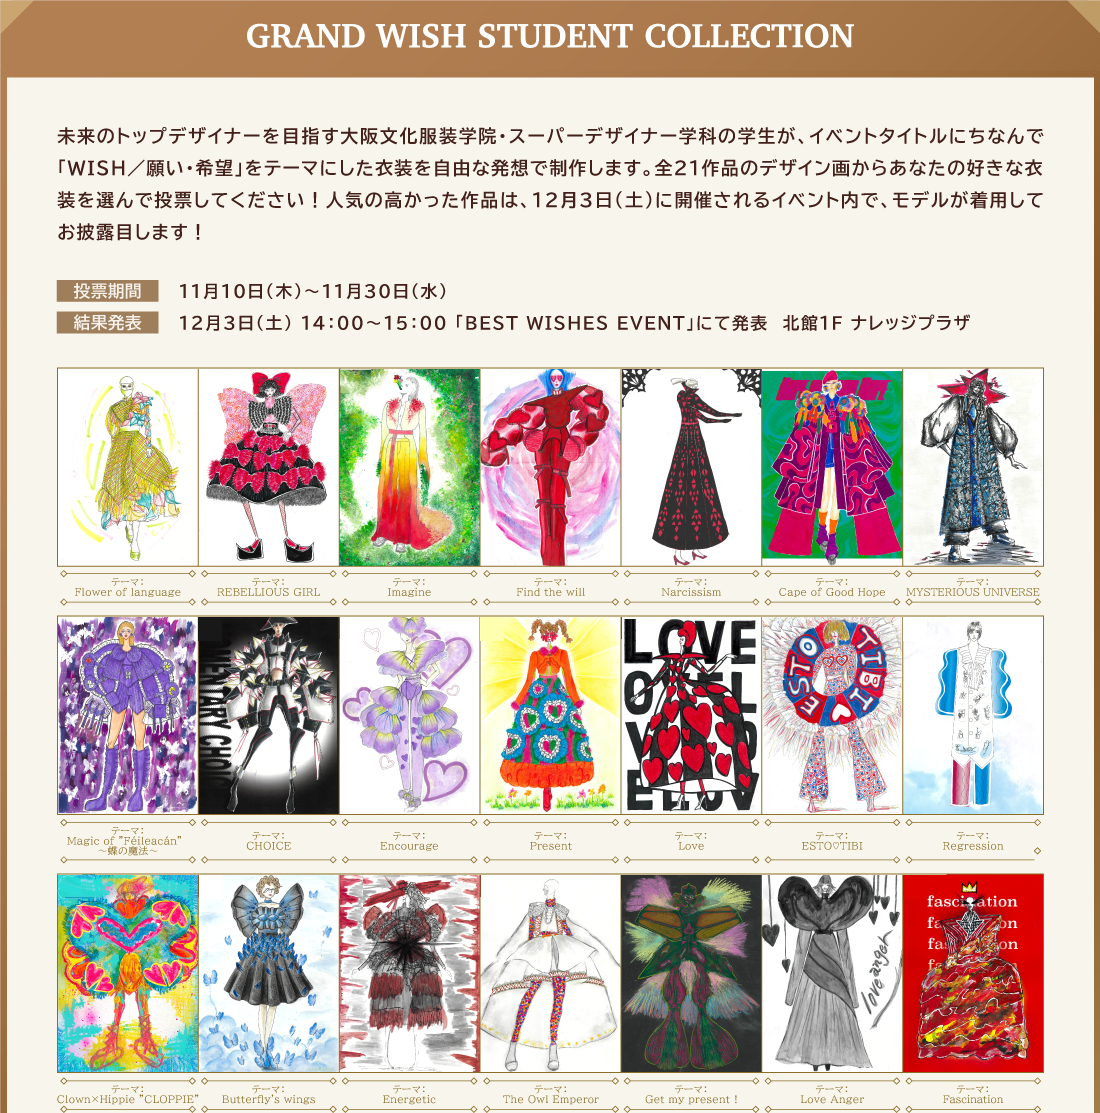 GRAND WISH STUDENT COLLECTION